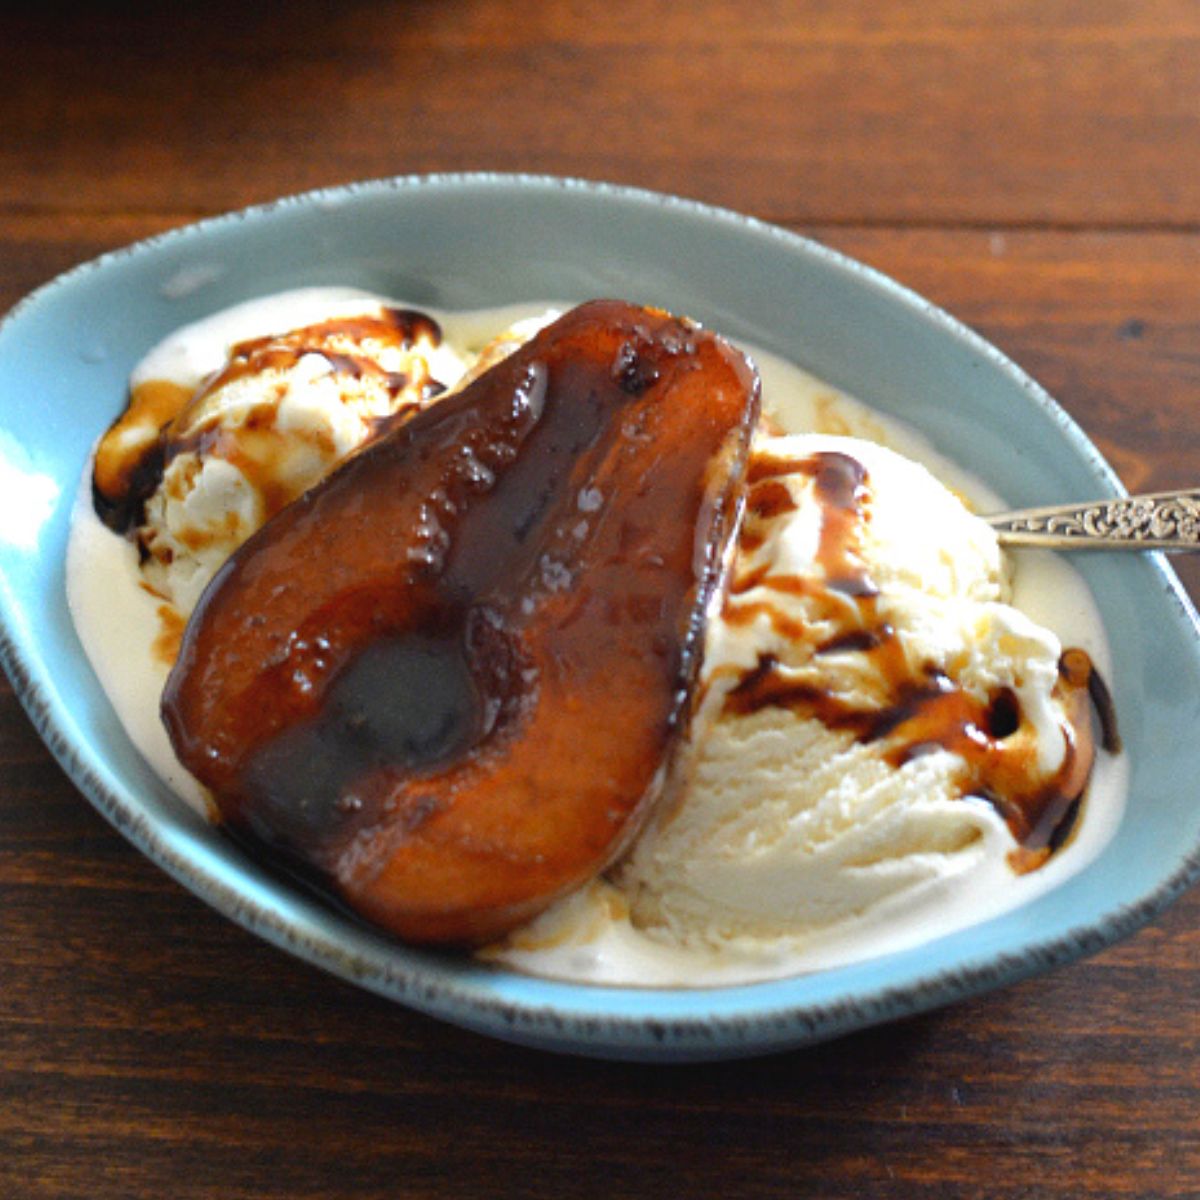 Balsamic Poached Peach served over vanilla ice cream in a bowl.